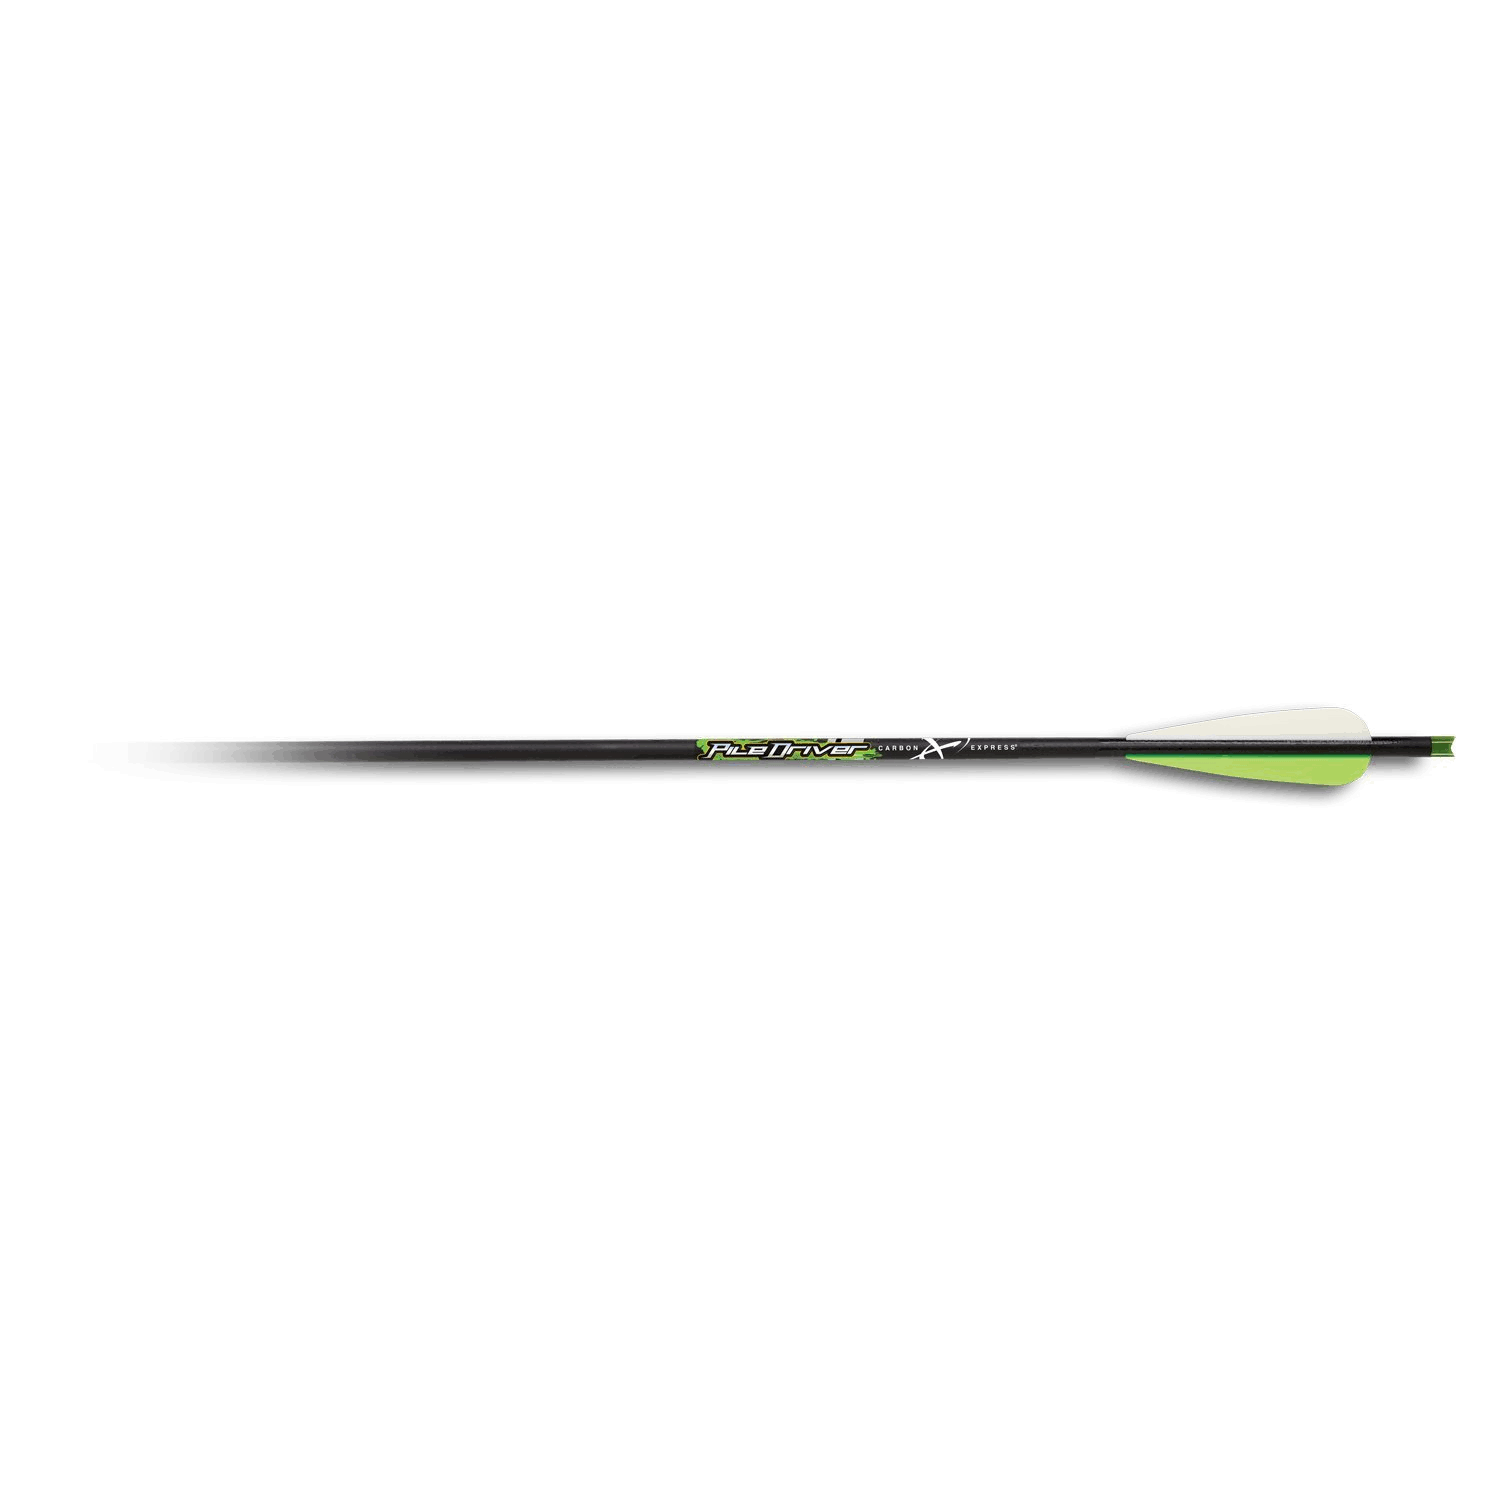 Carbon Express Hunting Arrow - Lighted Nock, 20"